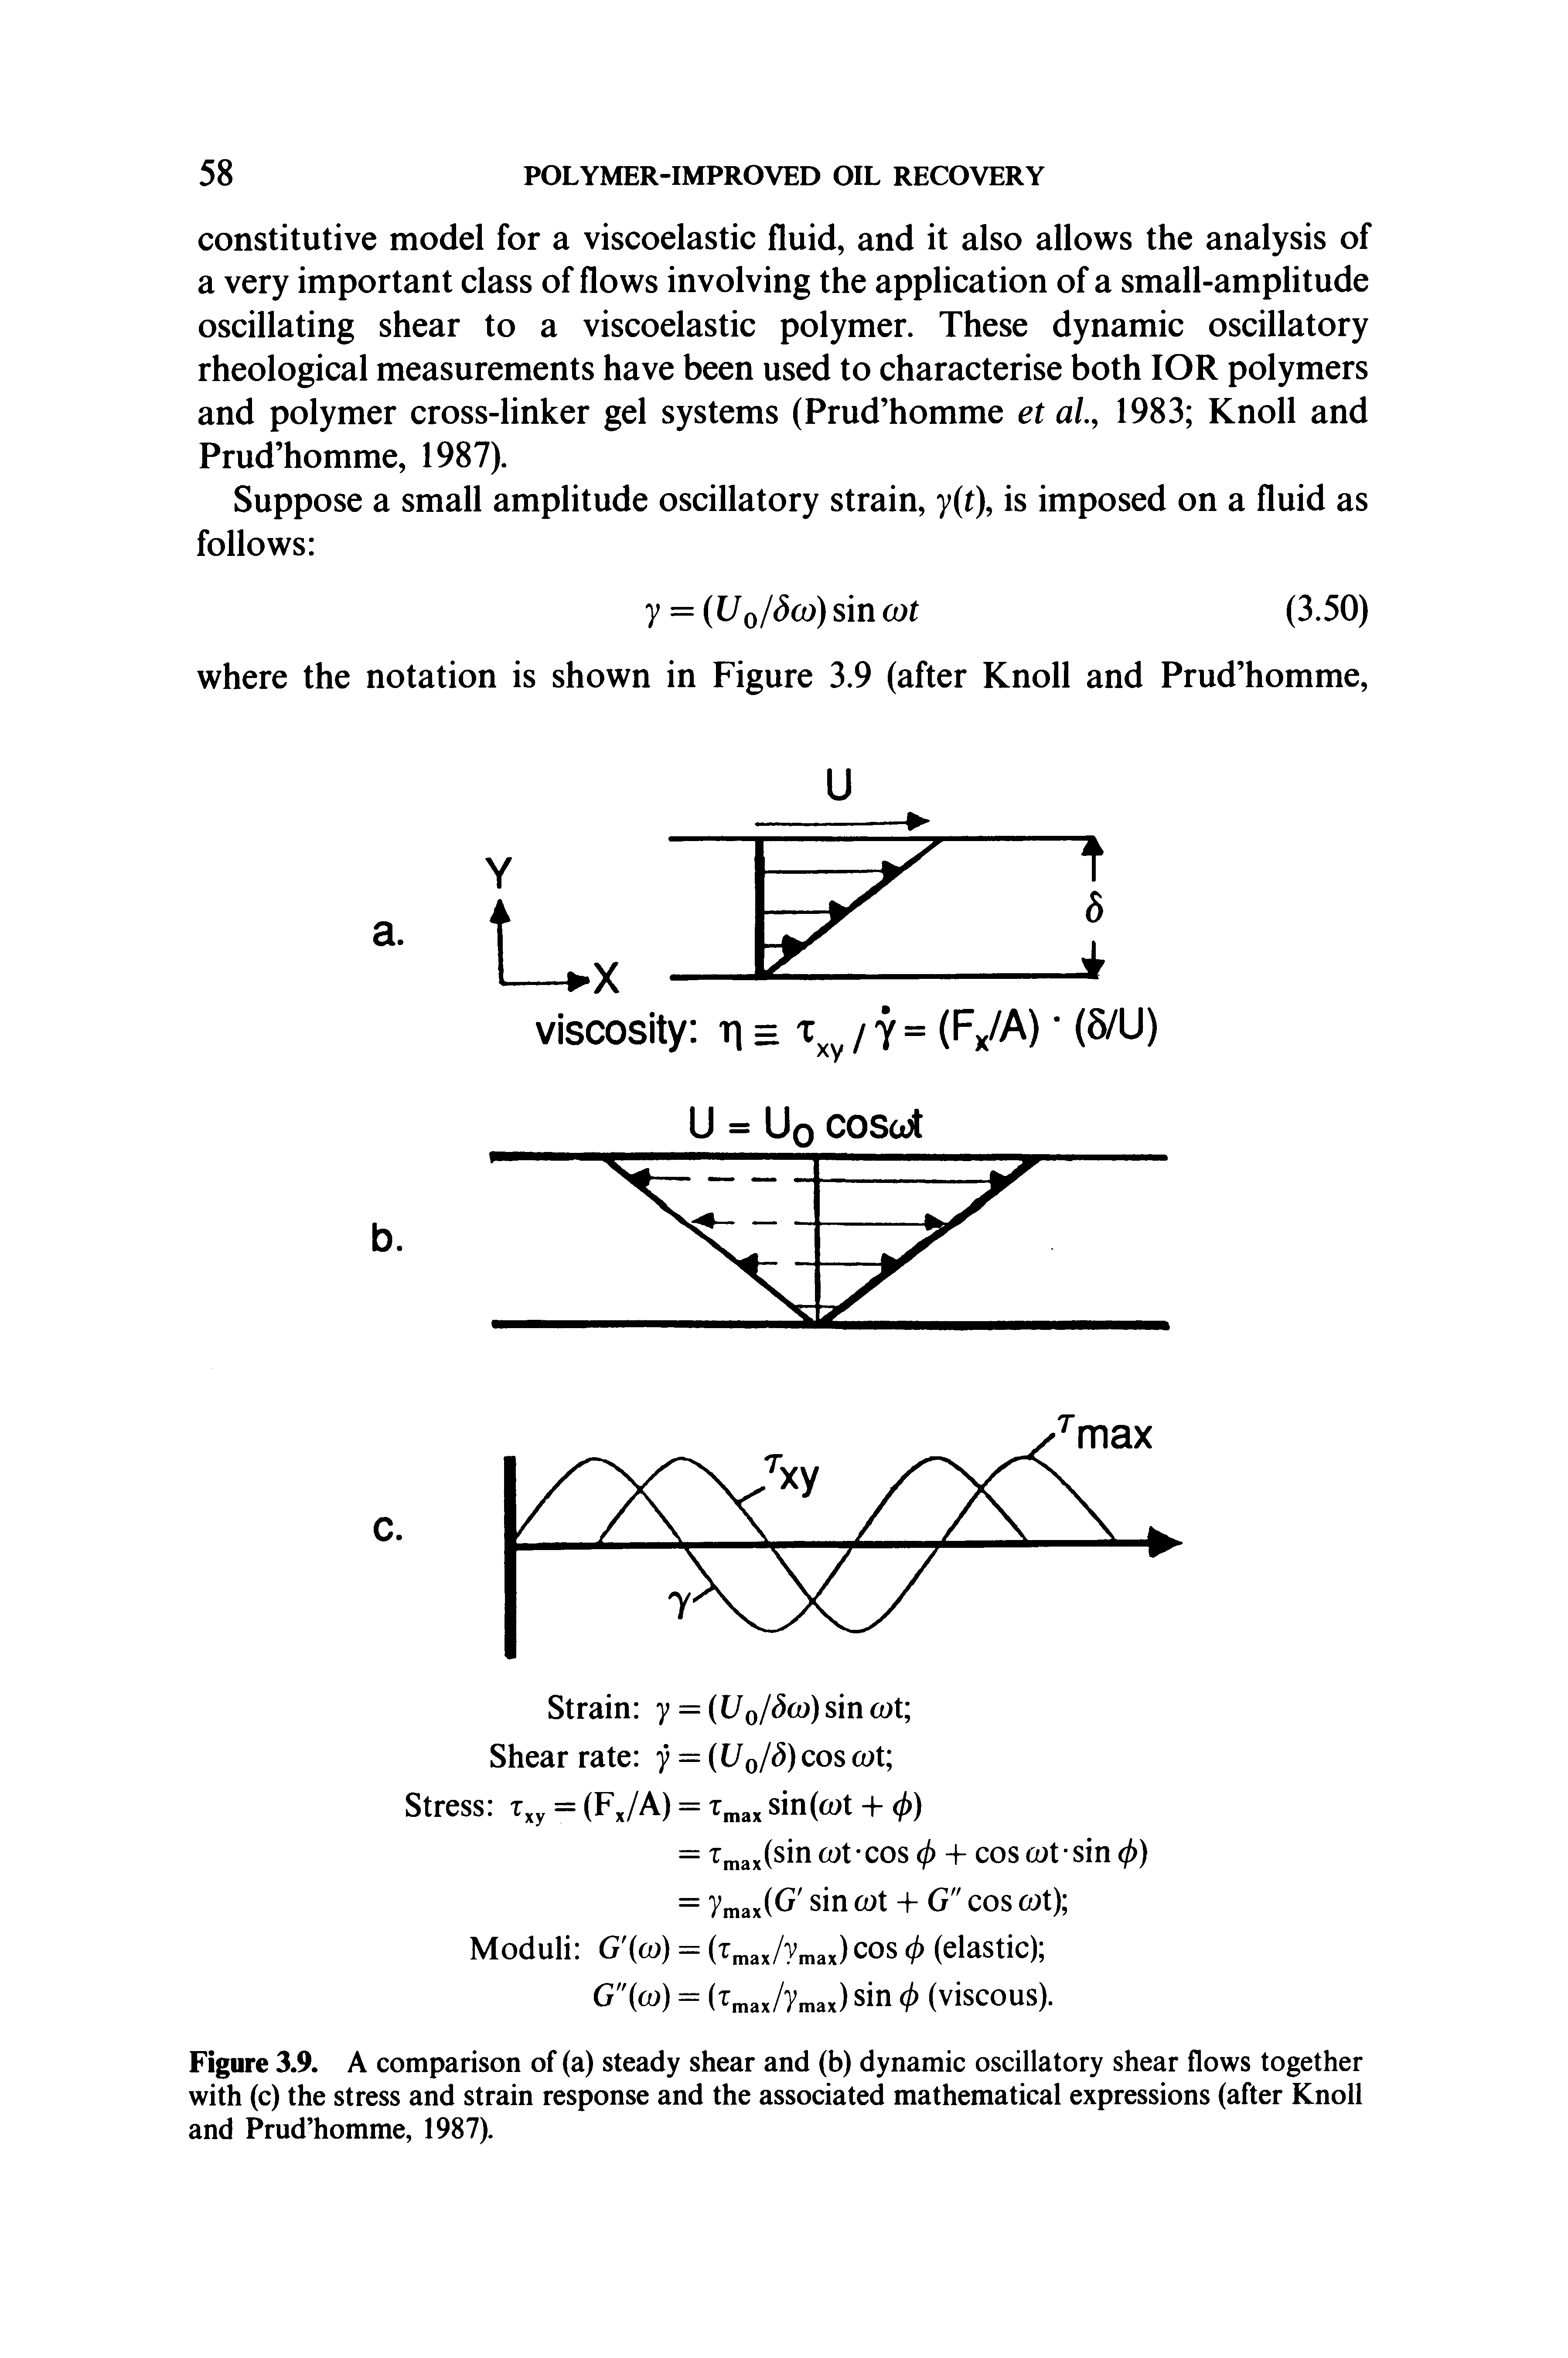 Figure 3.9. A comparison of (a) steady shear and (b) dynamic oscillatory shear flows together with (c) the stress and strain response and the associated mathematical expressions (after Knoll and Prud homme, 1987).